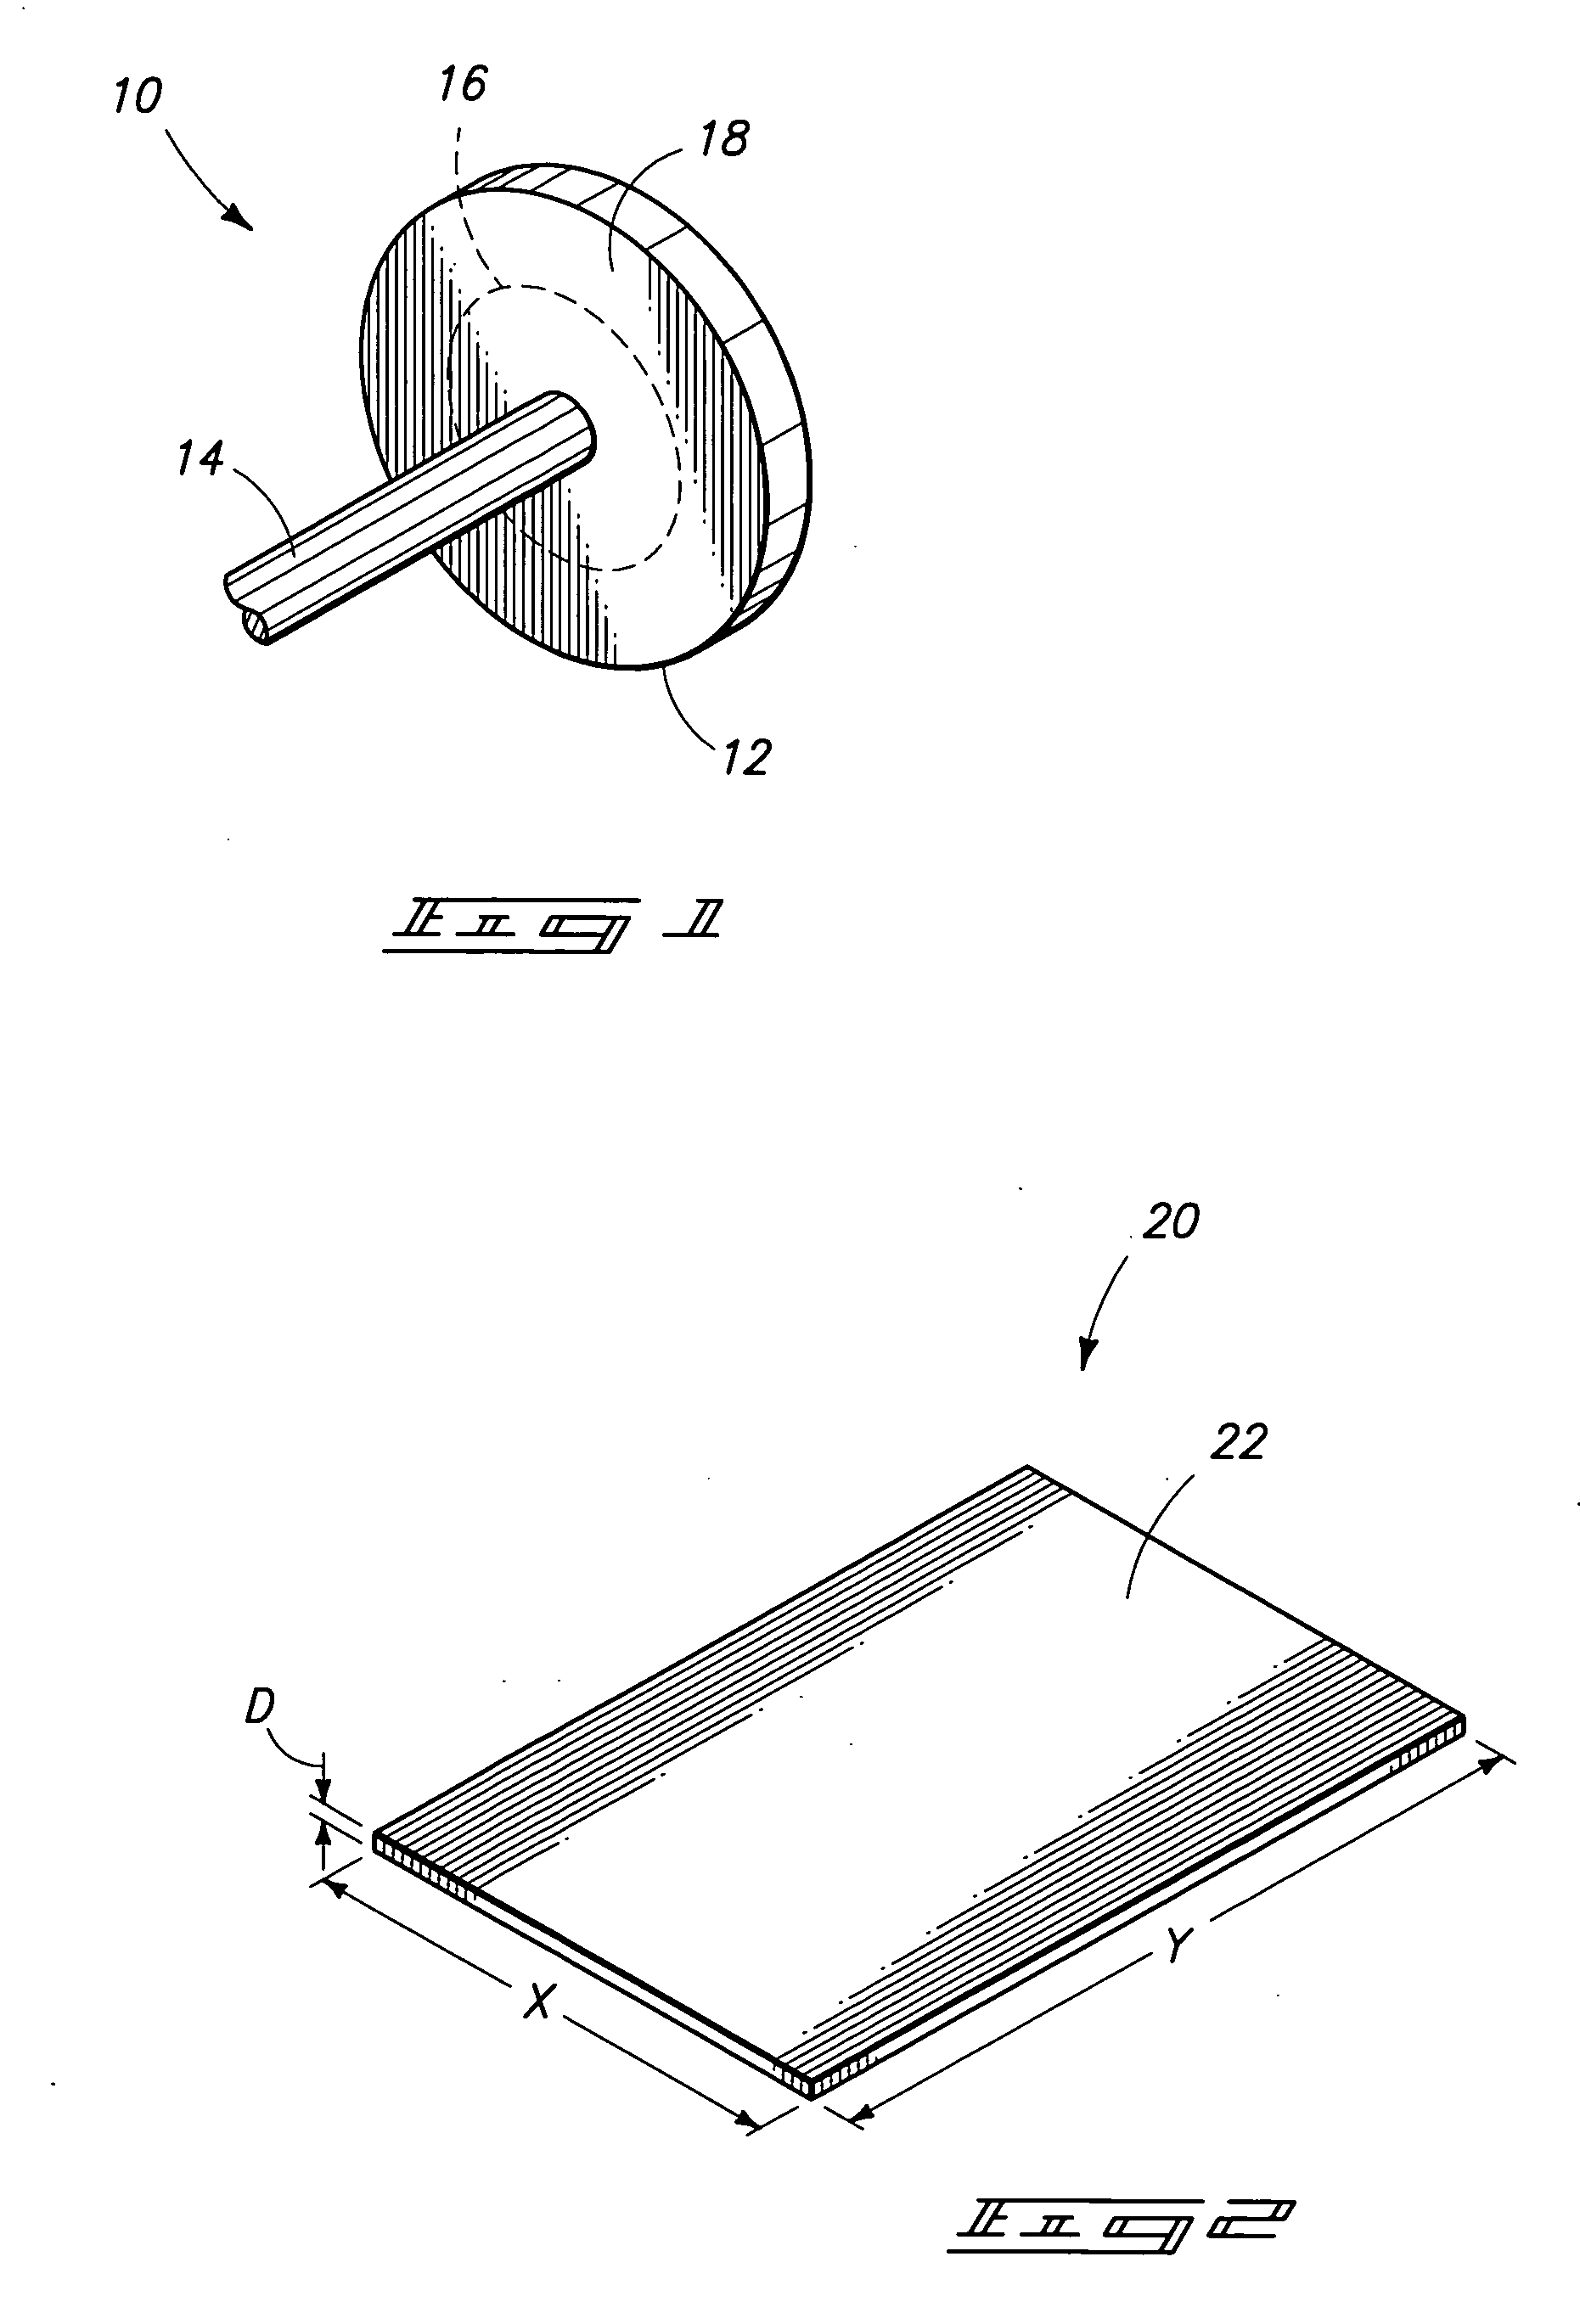 High-strength mechanical and structural components, and methods of making high-strength components